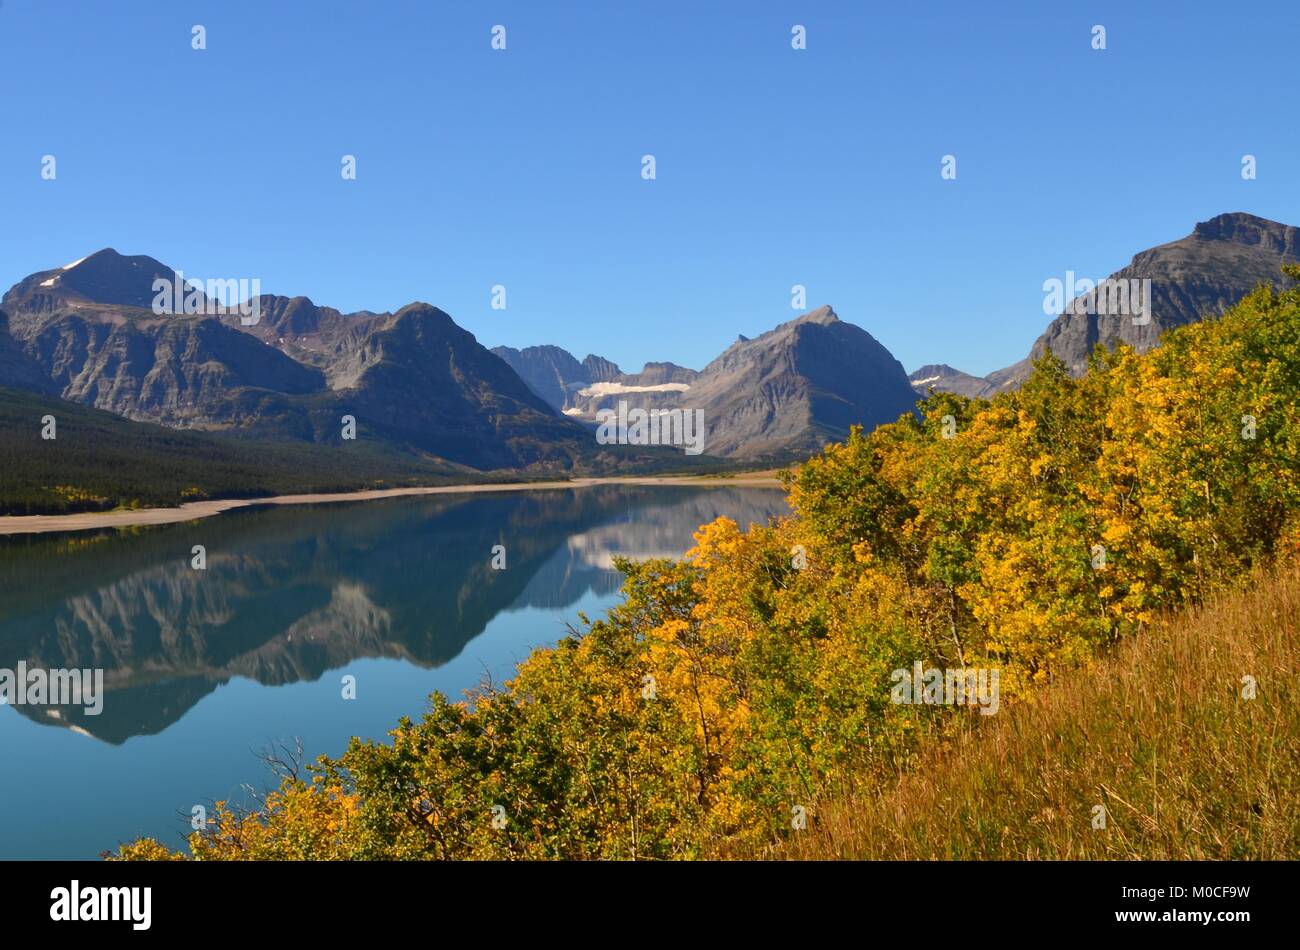 A calm clear day with a wonderful reflection of the mountains in the water, at Many Glaciers, Montana, USA Stock Photo